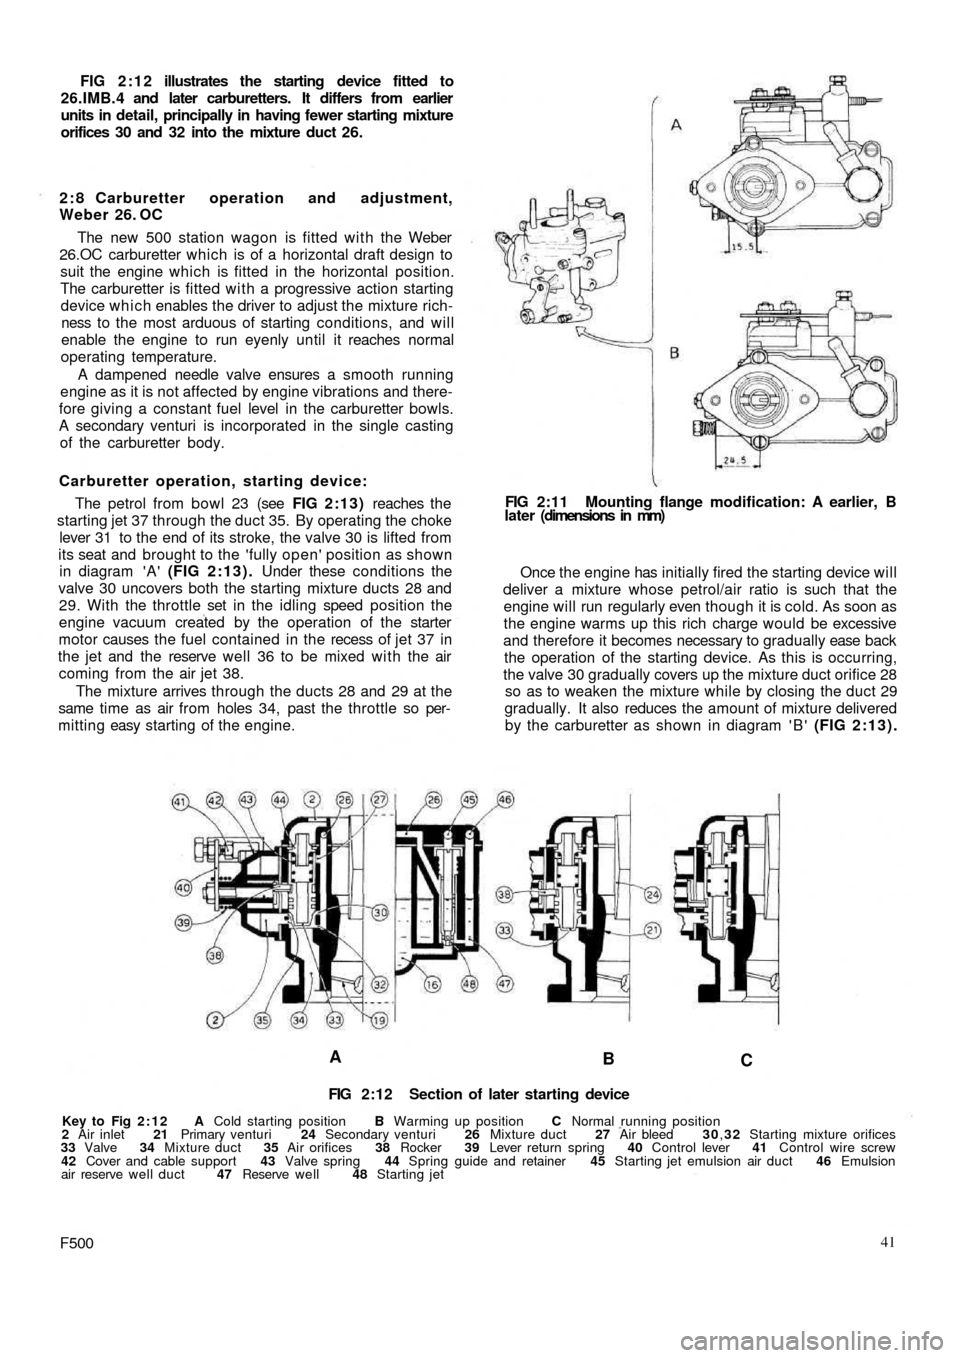 FIAT 500 1969 1.G Owners Guide FIG 2:12 illustrates the starting device fitted to
26.IMB.4 and later carburetters. It differs from earlier
units in detail, principally in having fewer starting mixture
orifices 30 and 32 into the mi